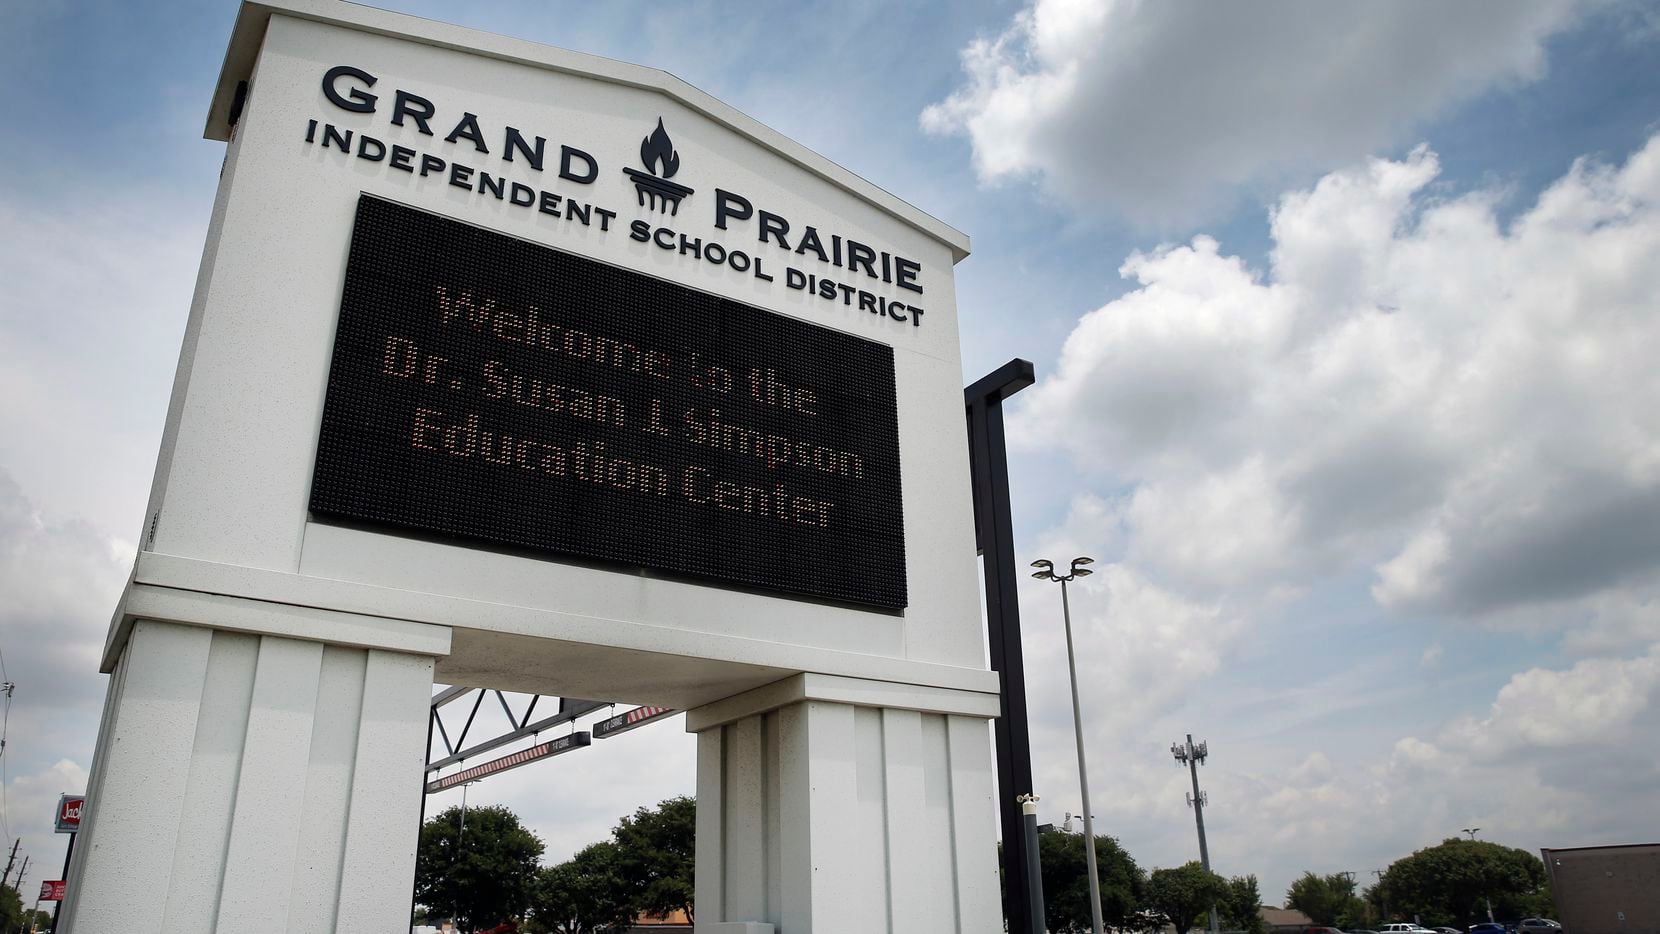 A Grand Prairie Independent School District sign welcomes people to the Dr. Susan J. Simpson...